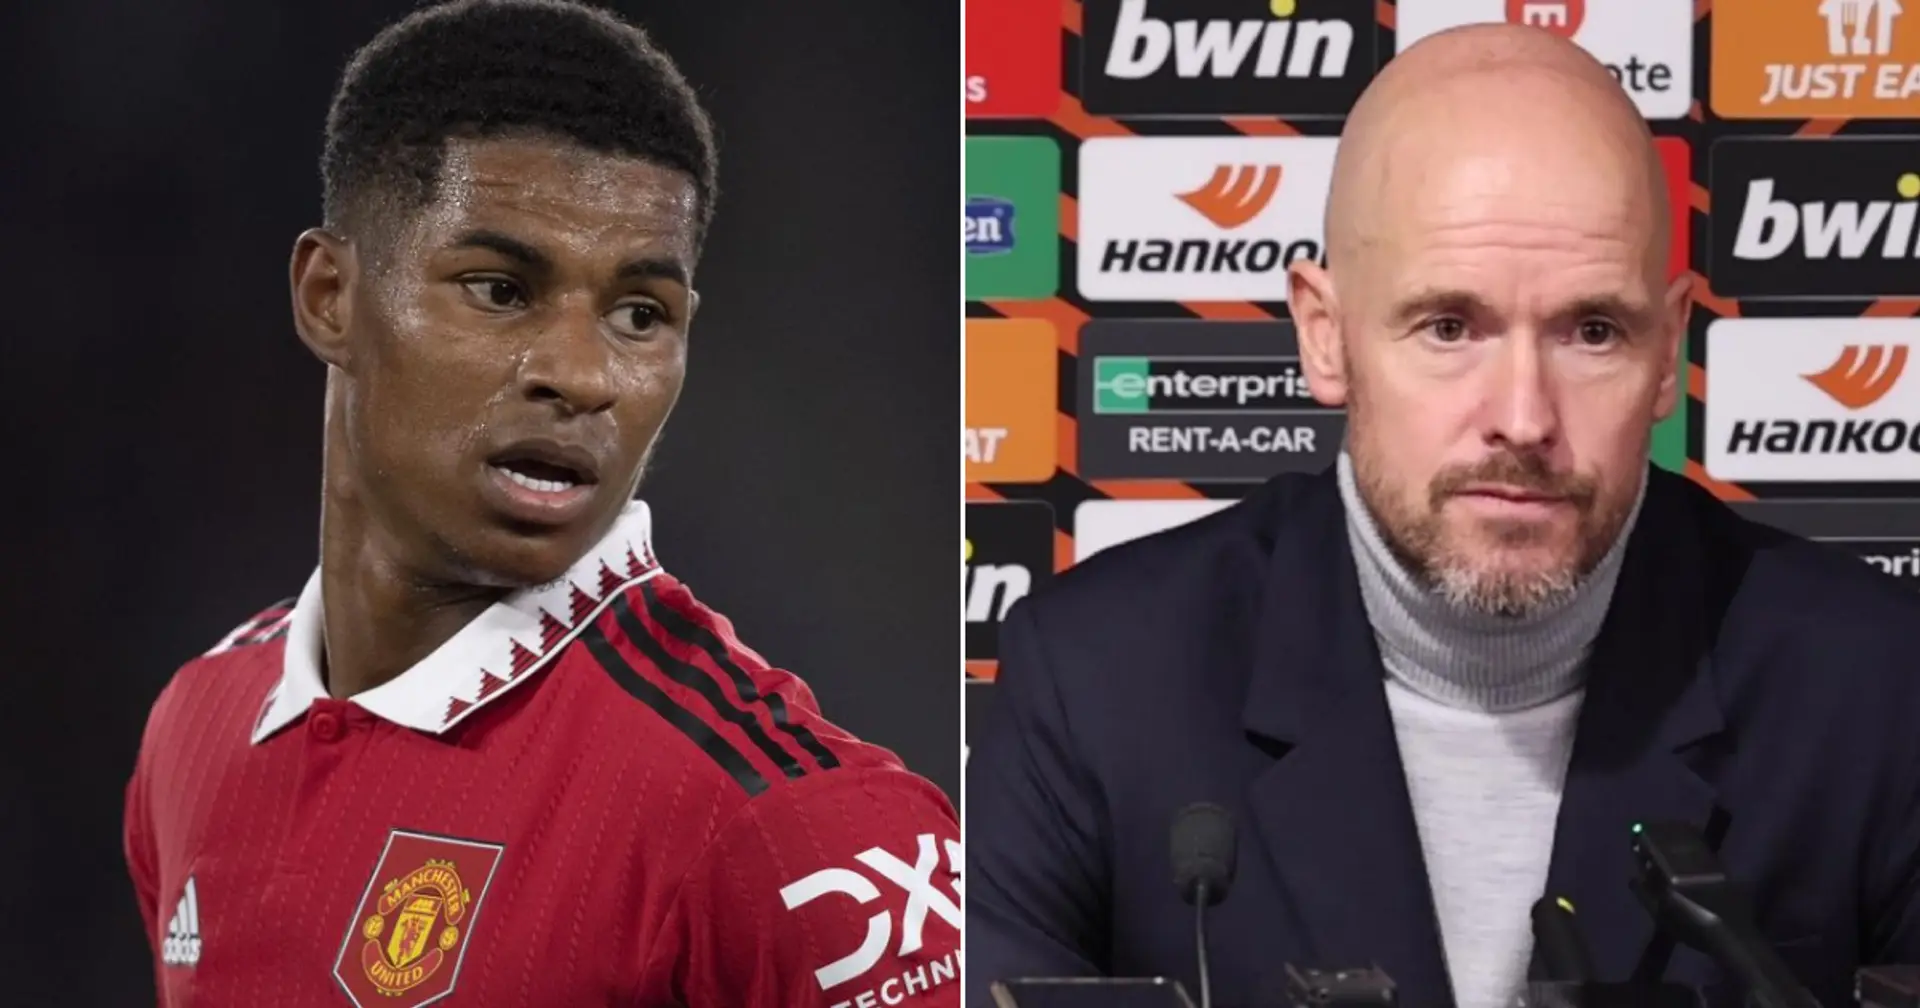 'He knows he has to be more clinical': Ten Hag reacts to Rashford's display vs Omonia